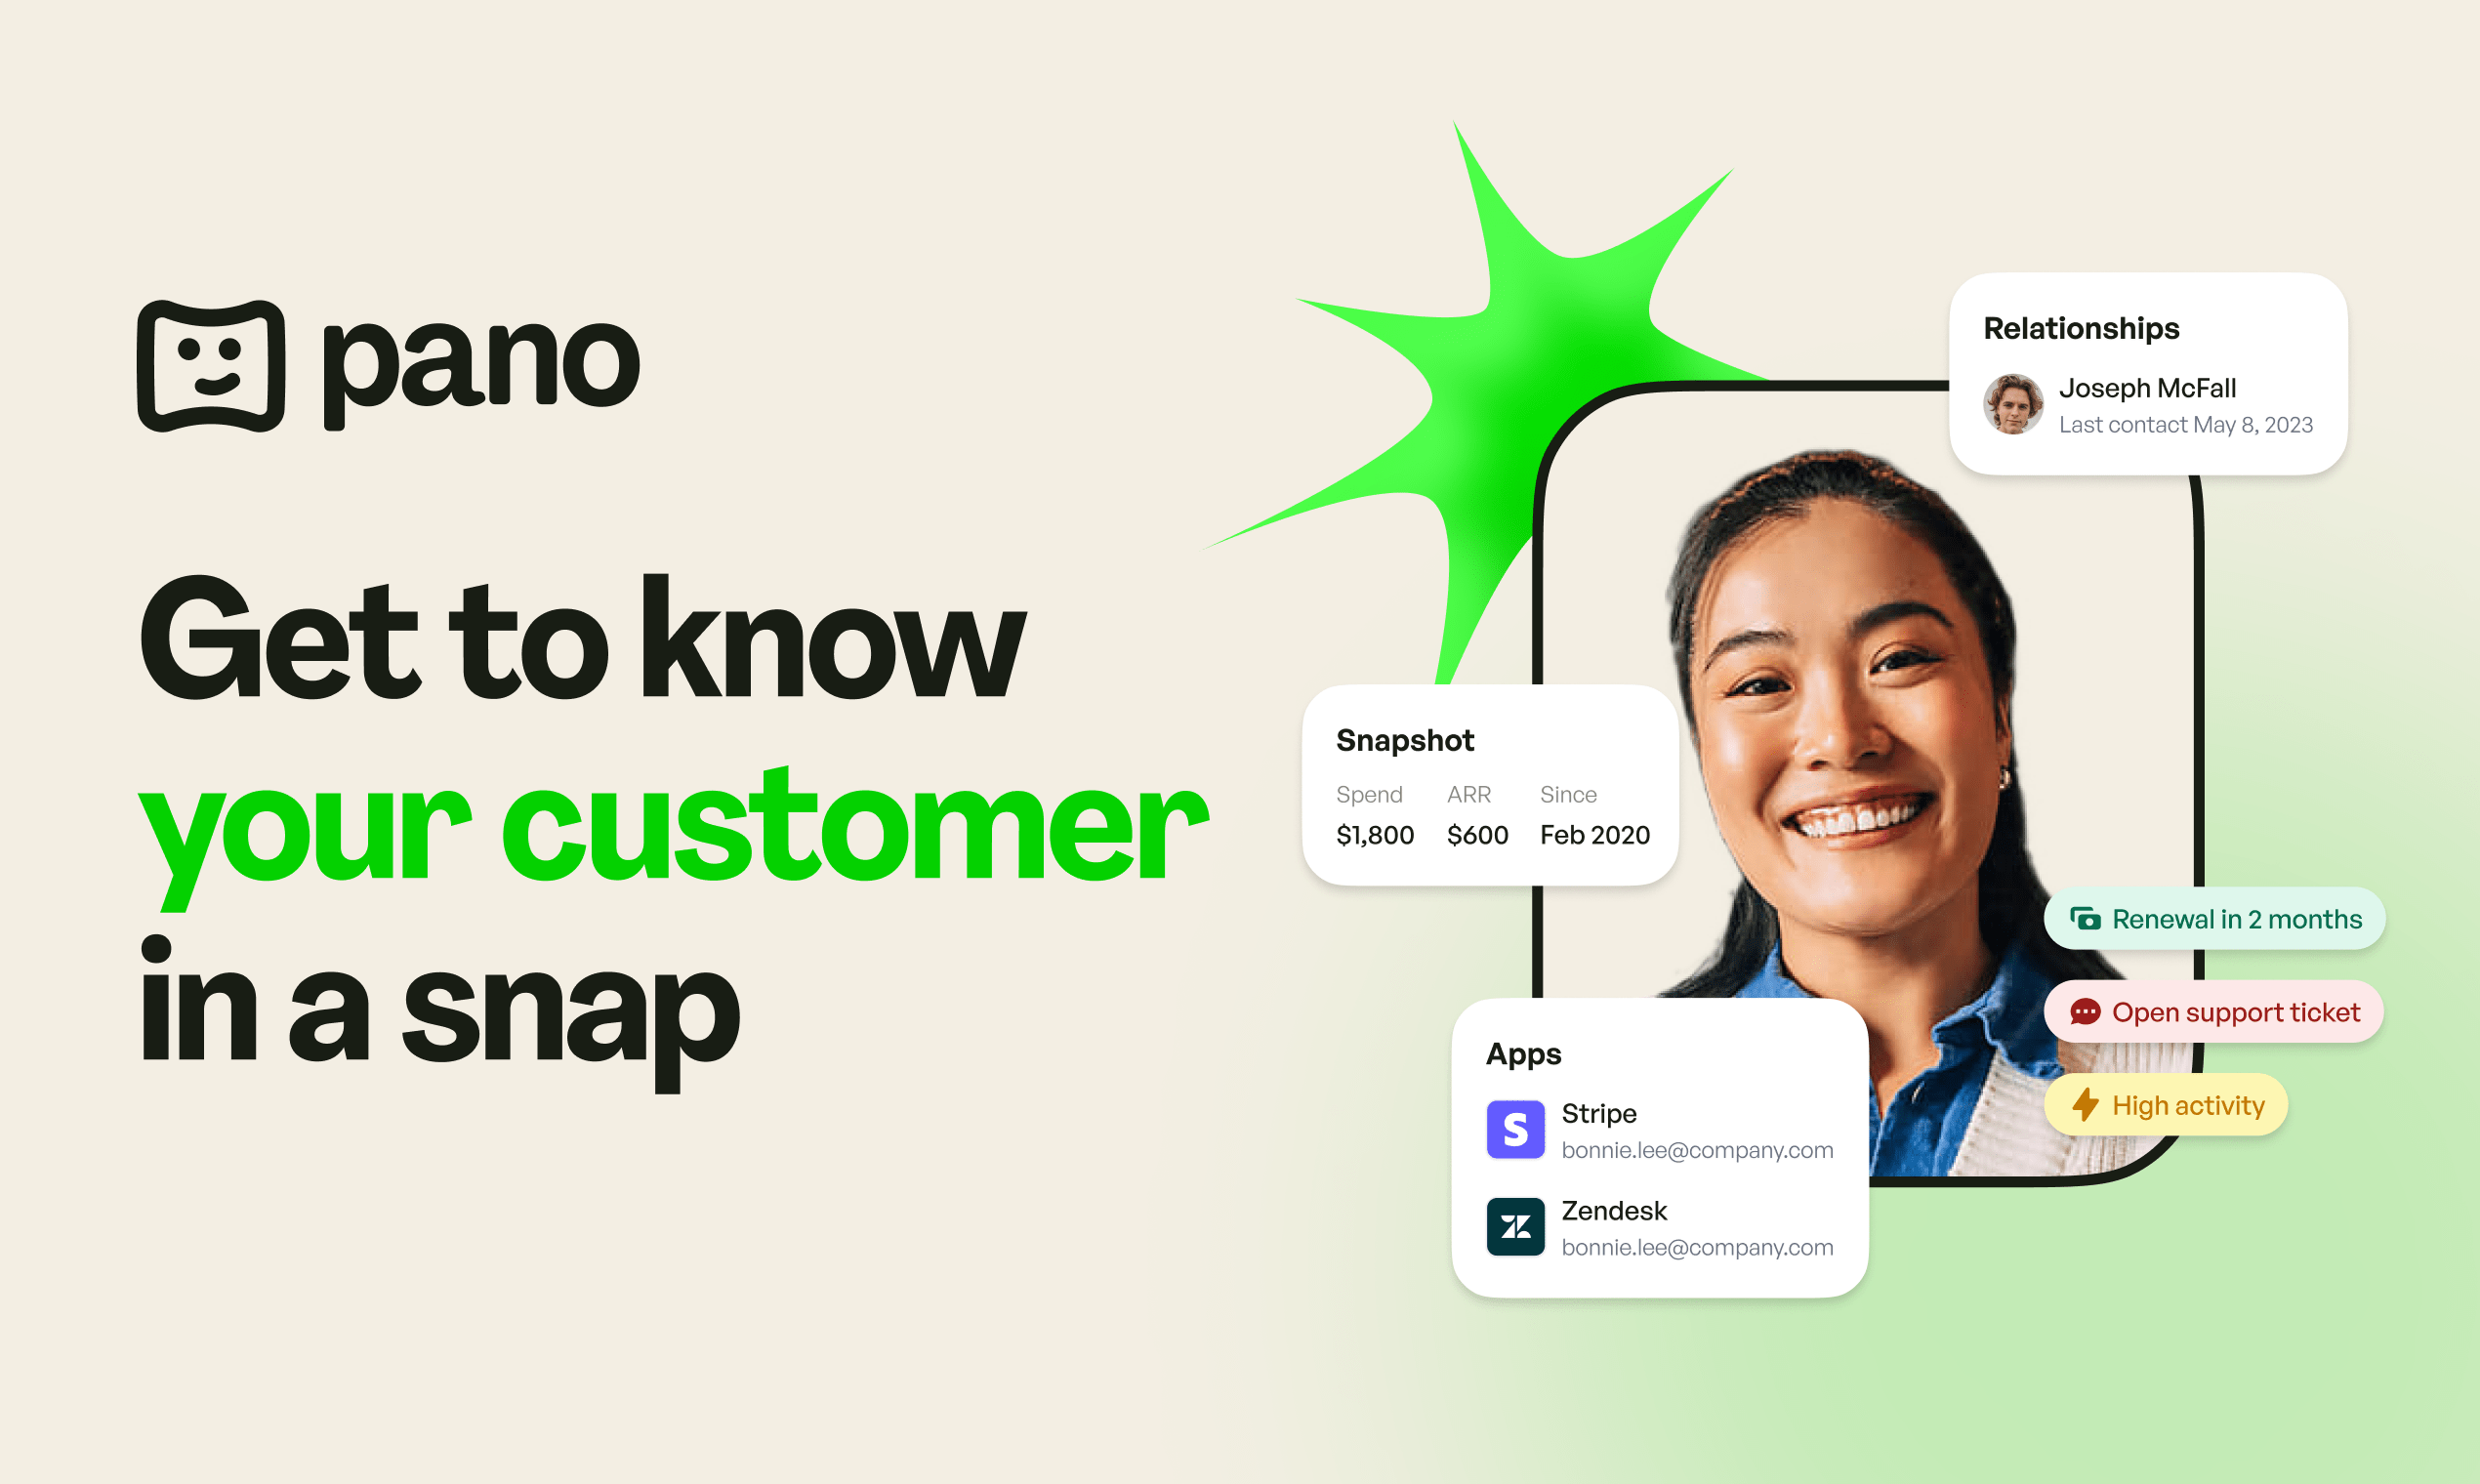 Get to know your customer in a snap